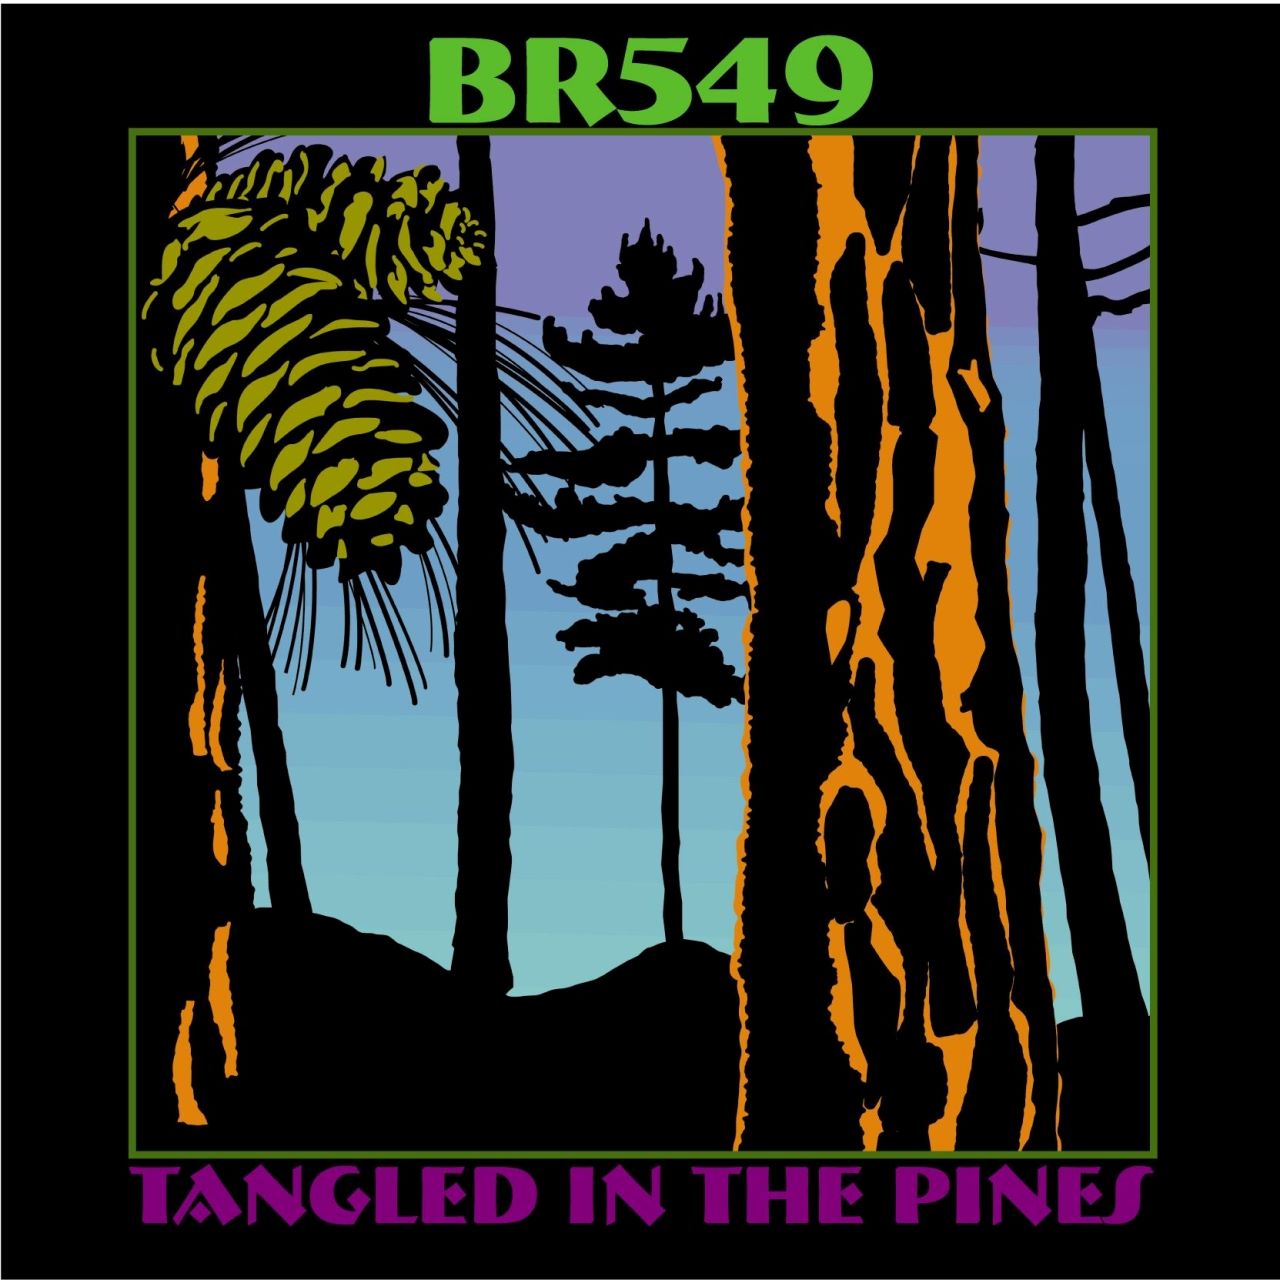 BR549 - Tangled In The Pines cover album